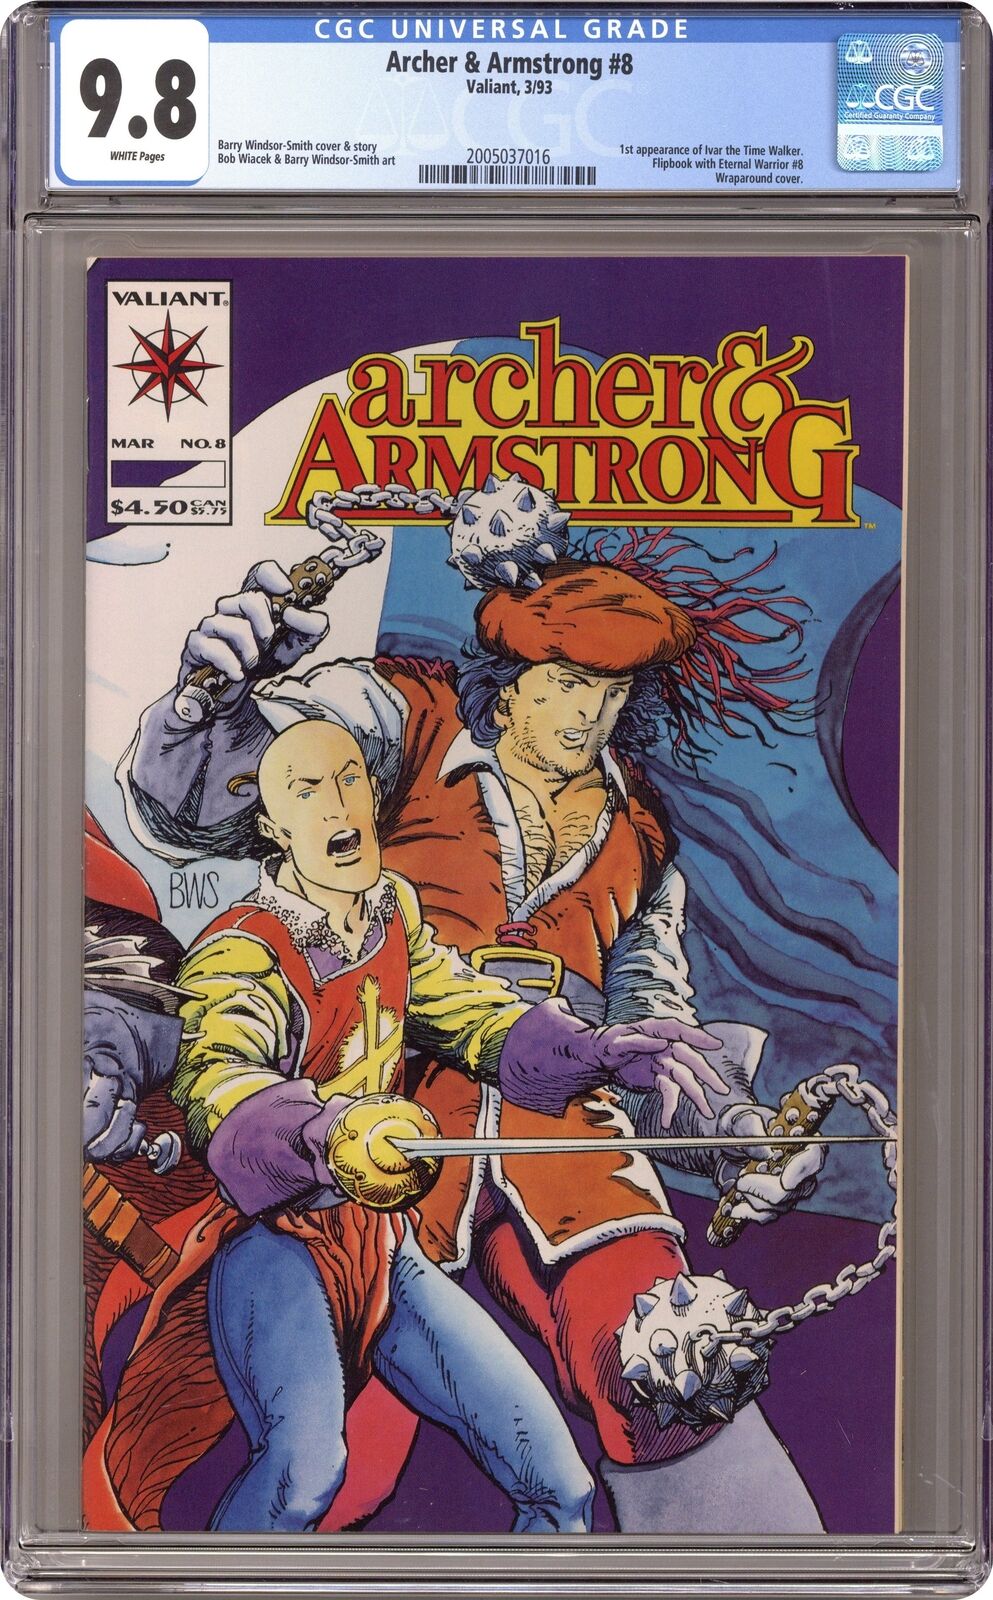 Archer and Armstrong #8 CGC 9.8 1993 2005037016